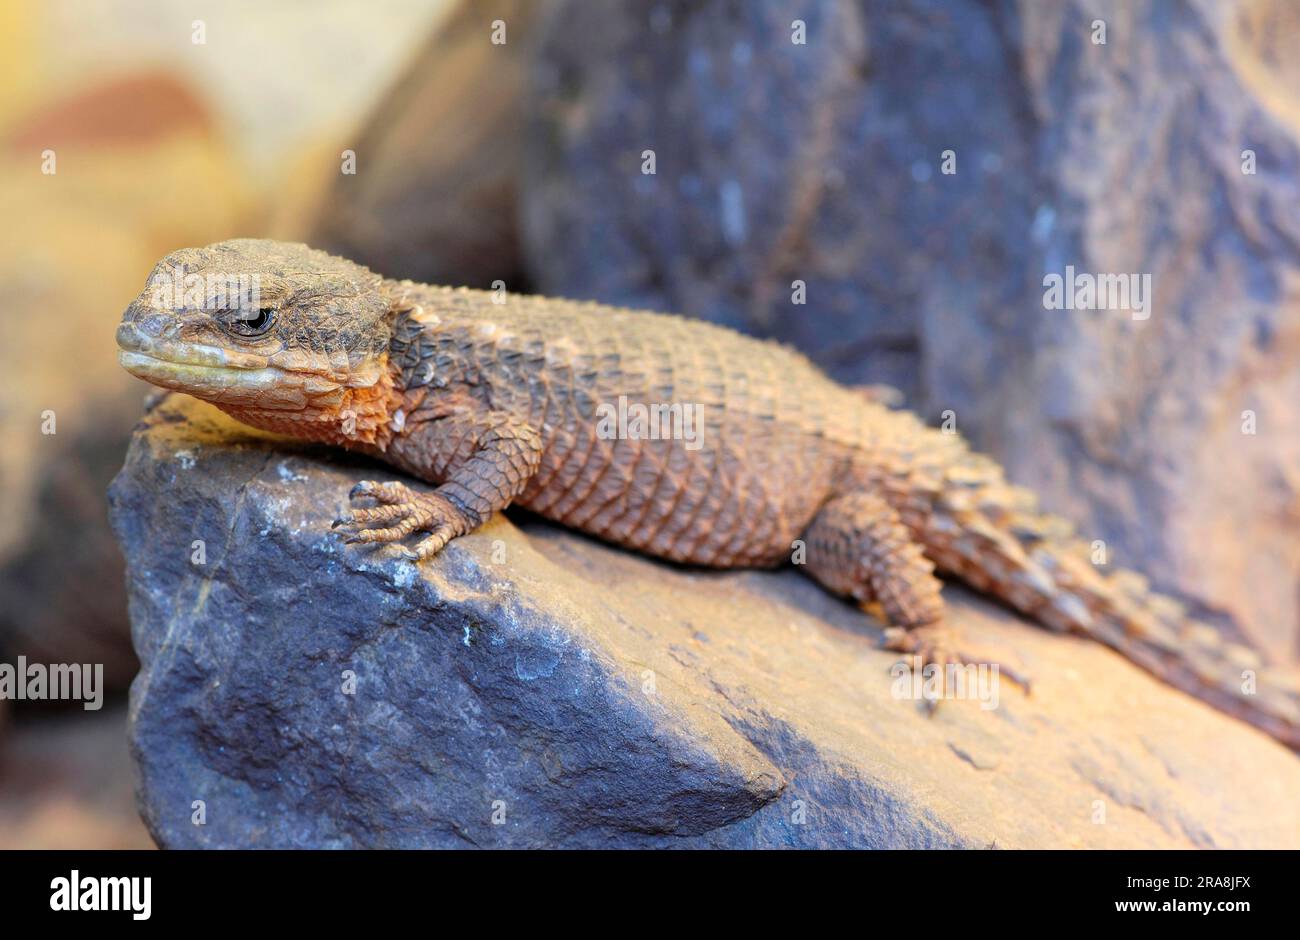 East african spiny-tailed lizard (Cordylus tropidosternum) Stock Photo